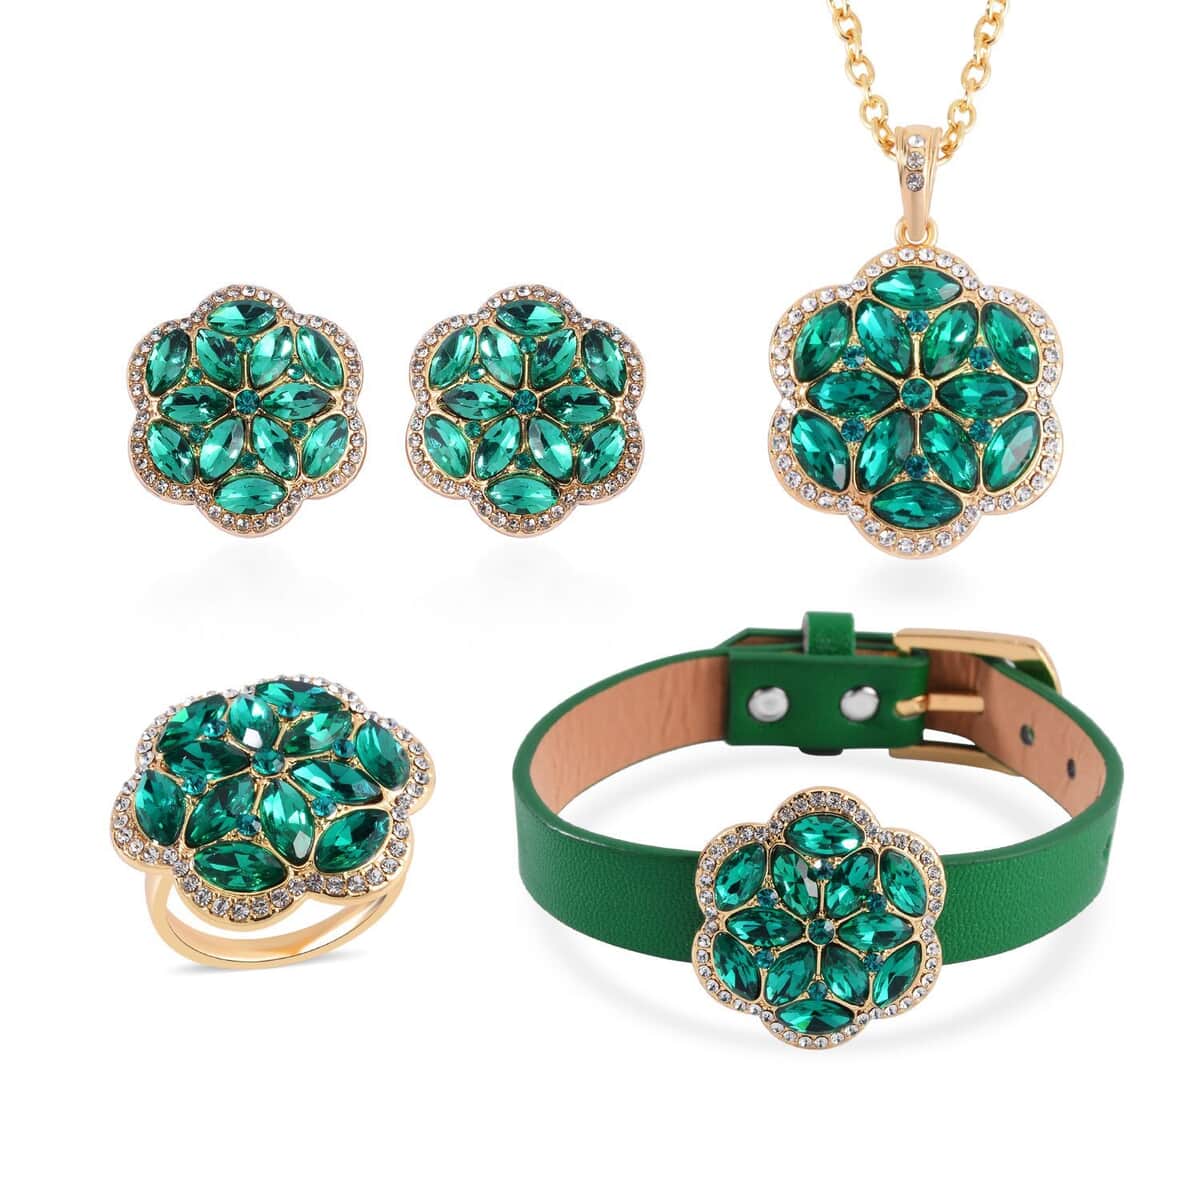 Green and White Austrian Crystal, Faux Leather Floral Bracelet (6-8In), Earrings, Ring (Size 8.0) and Pendant Necklace 20-22 Inches In Goldtone image number 0